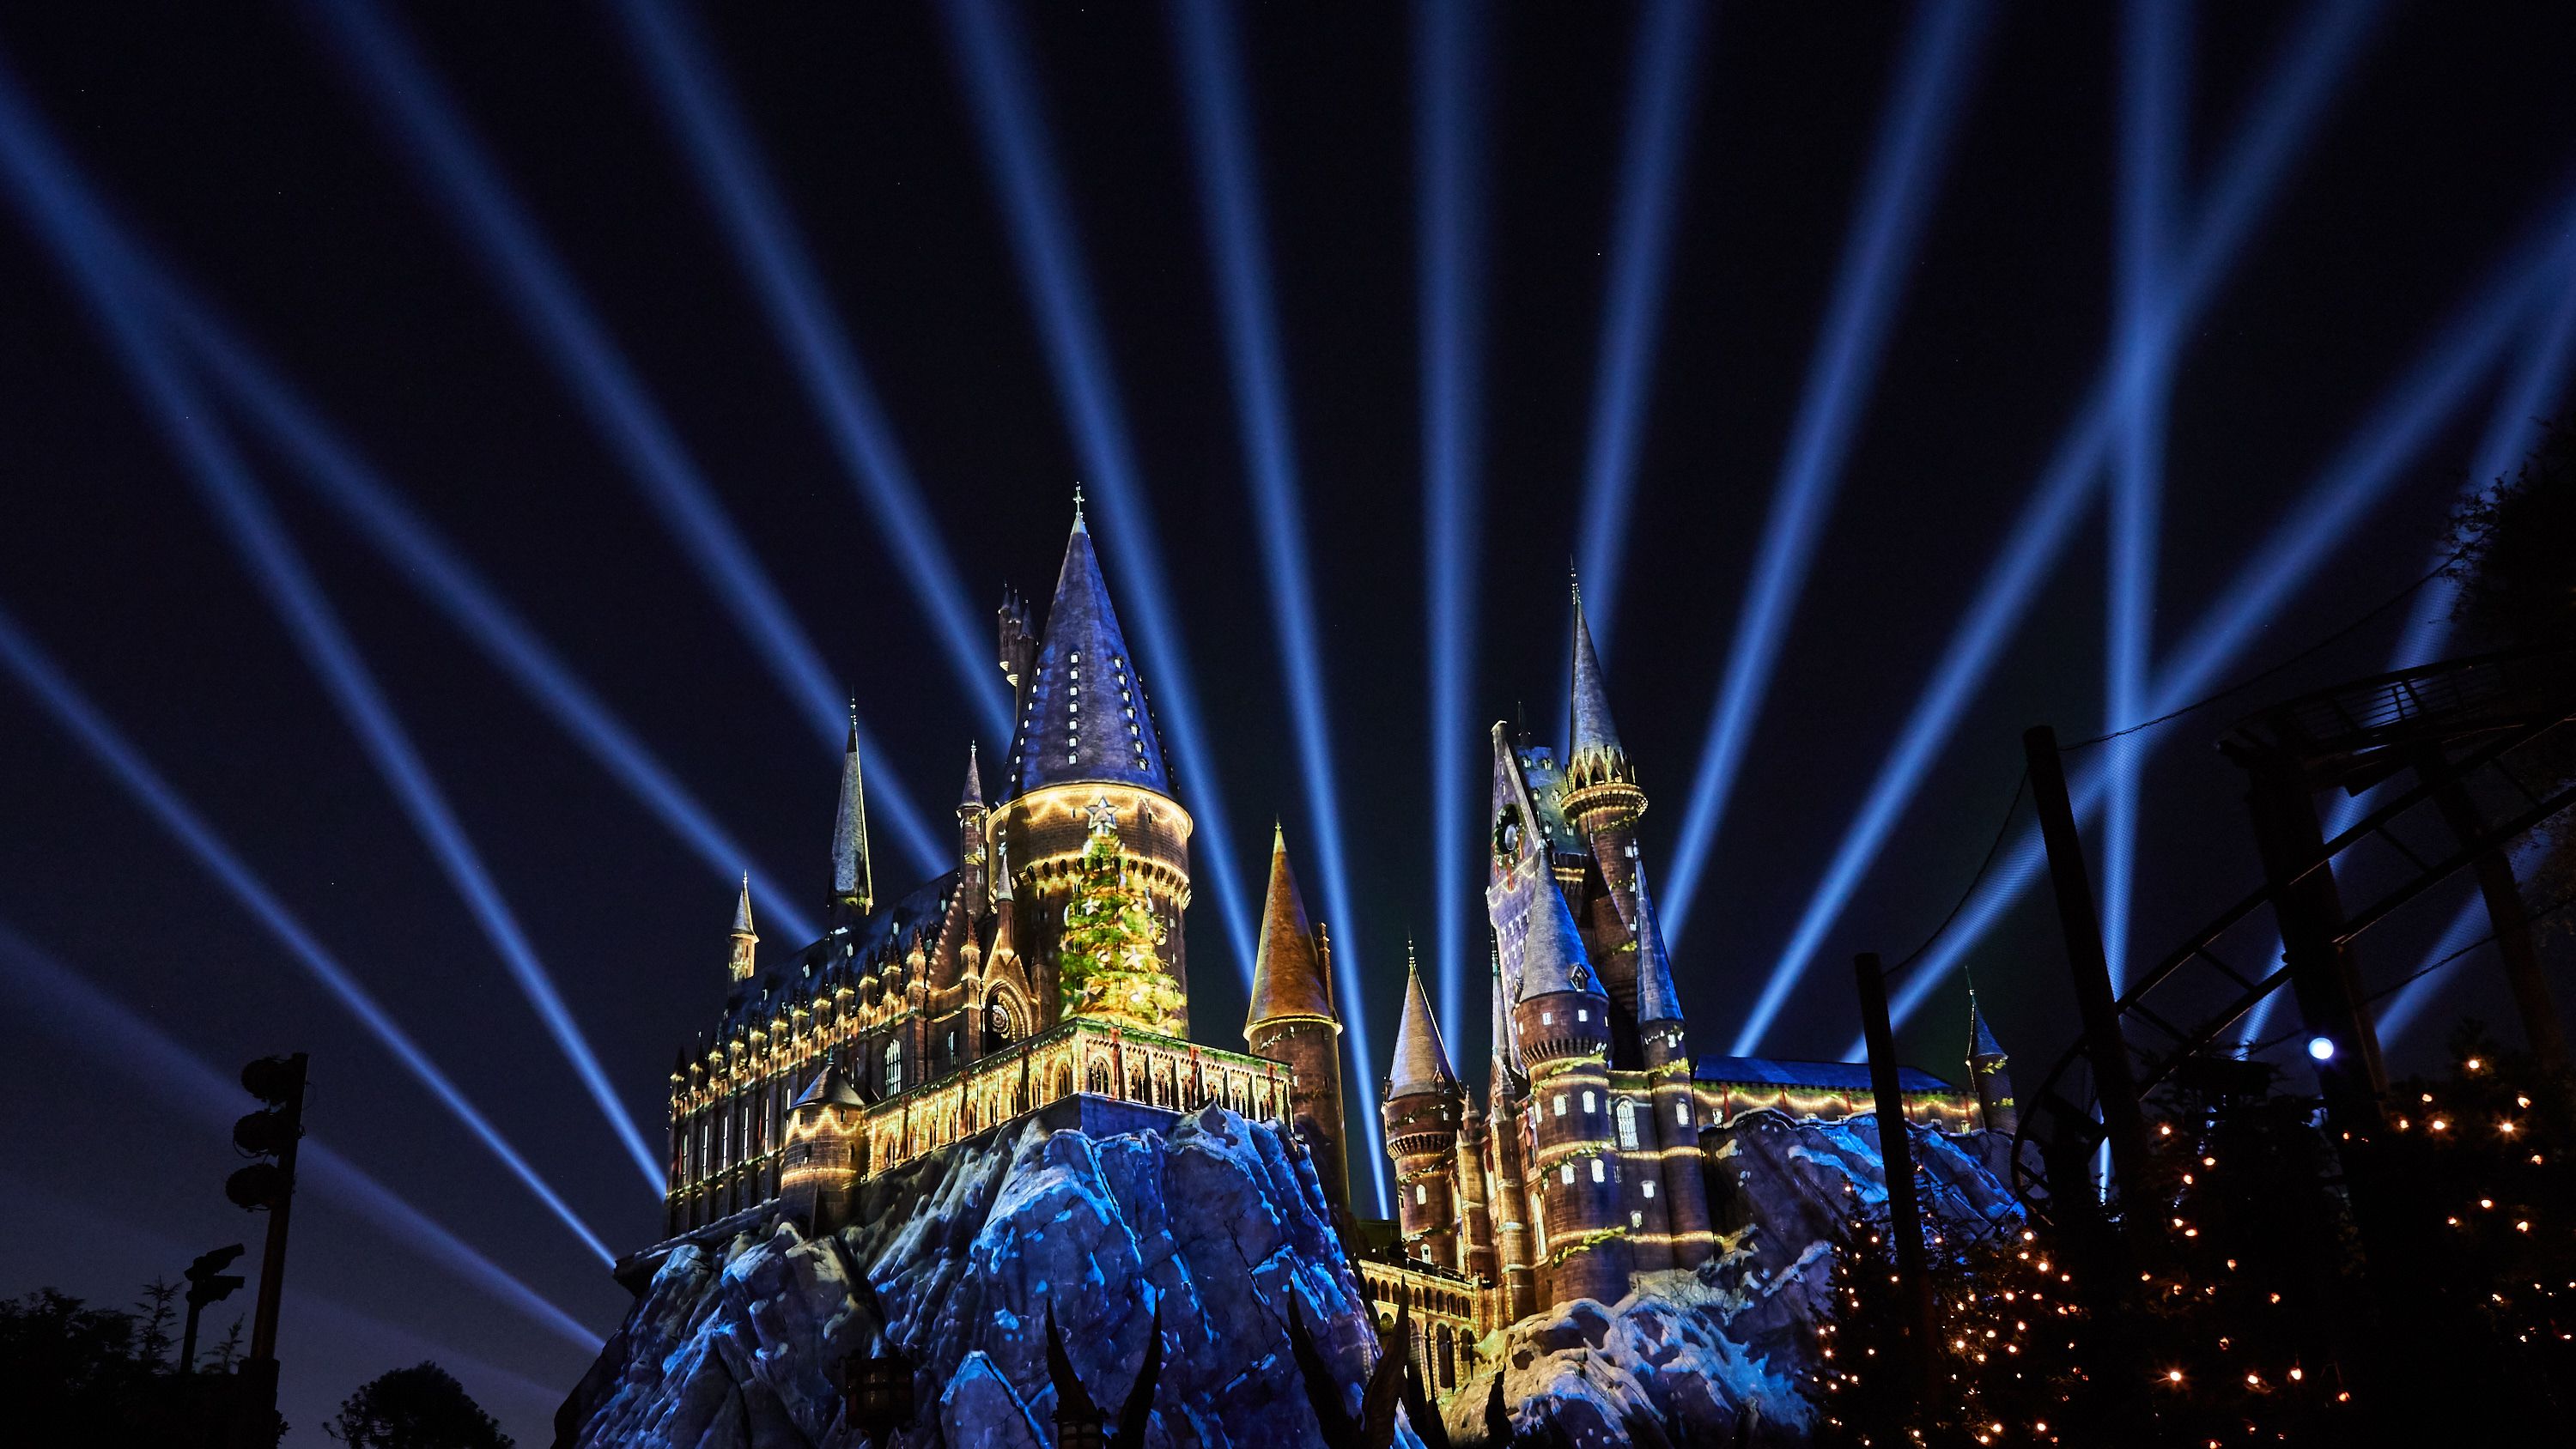 Get into the festive spirit with our Wizarding World Christmas gift guide  for 2020